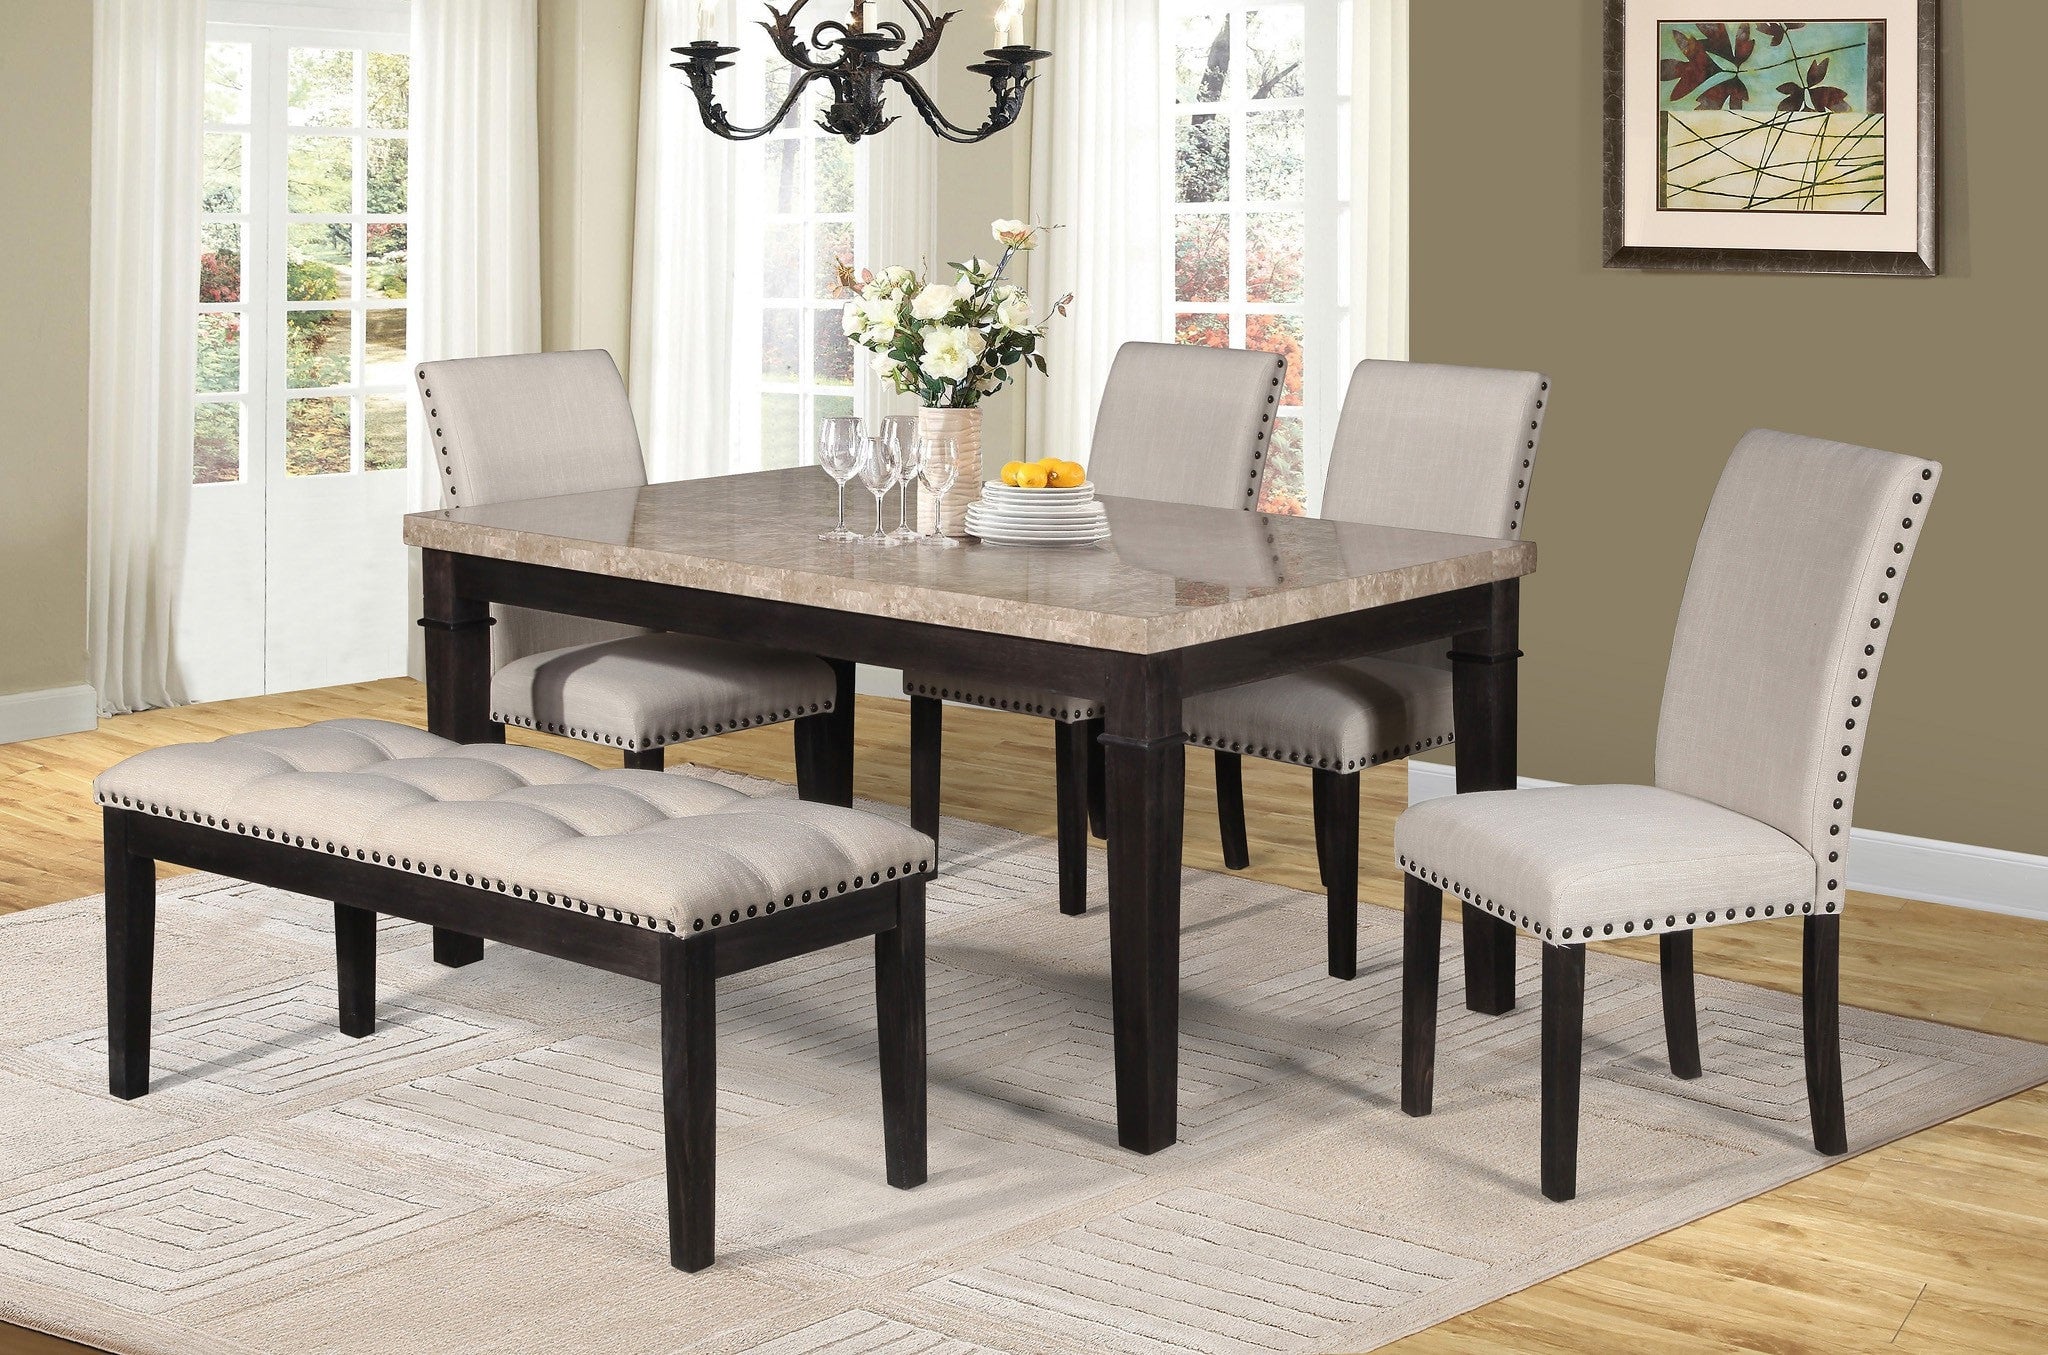 Sutton Dining Table Set Table 4 Chairs Bench 6 Pcs Set Afurniturecompany